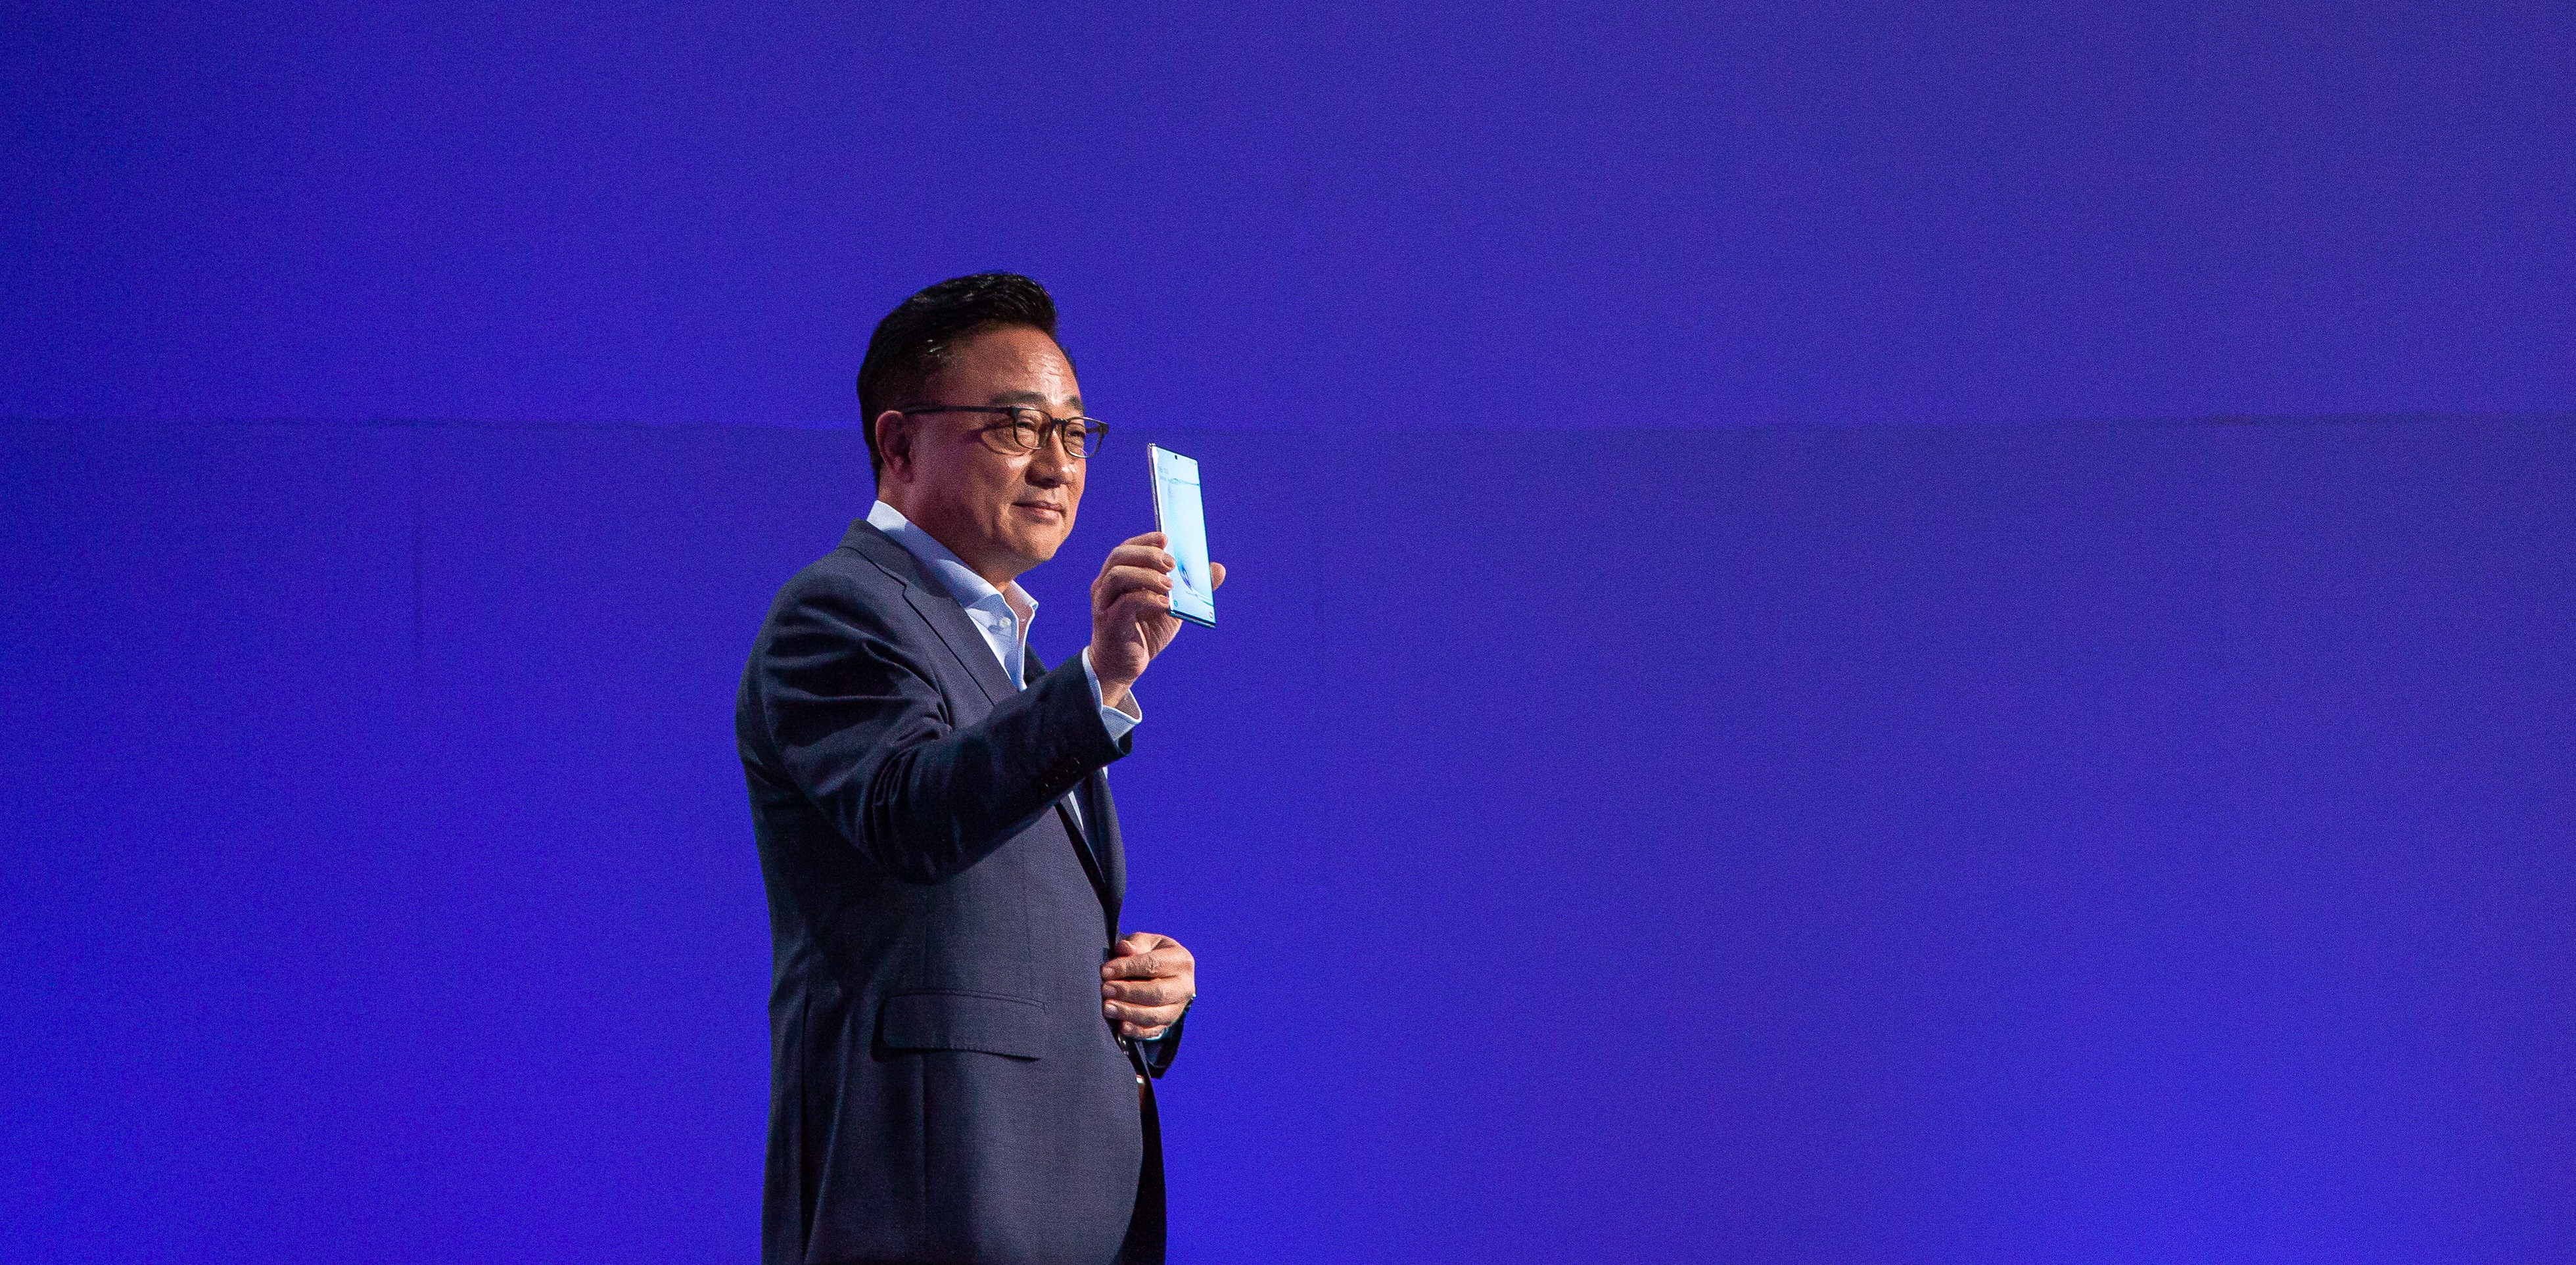 Samsung Unpacked Event Galaxy Note10